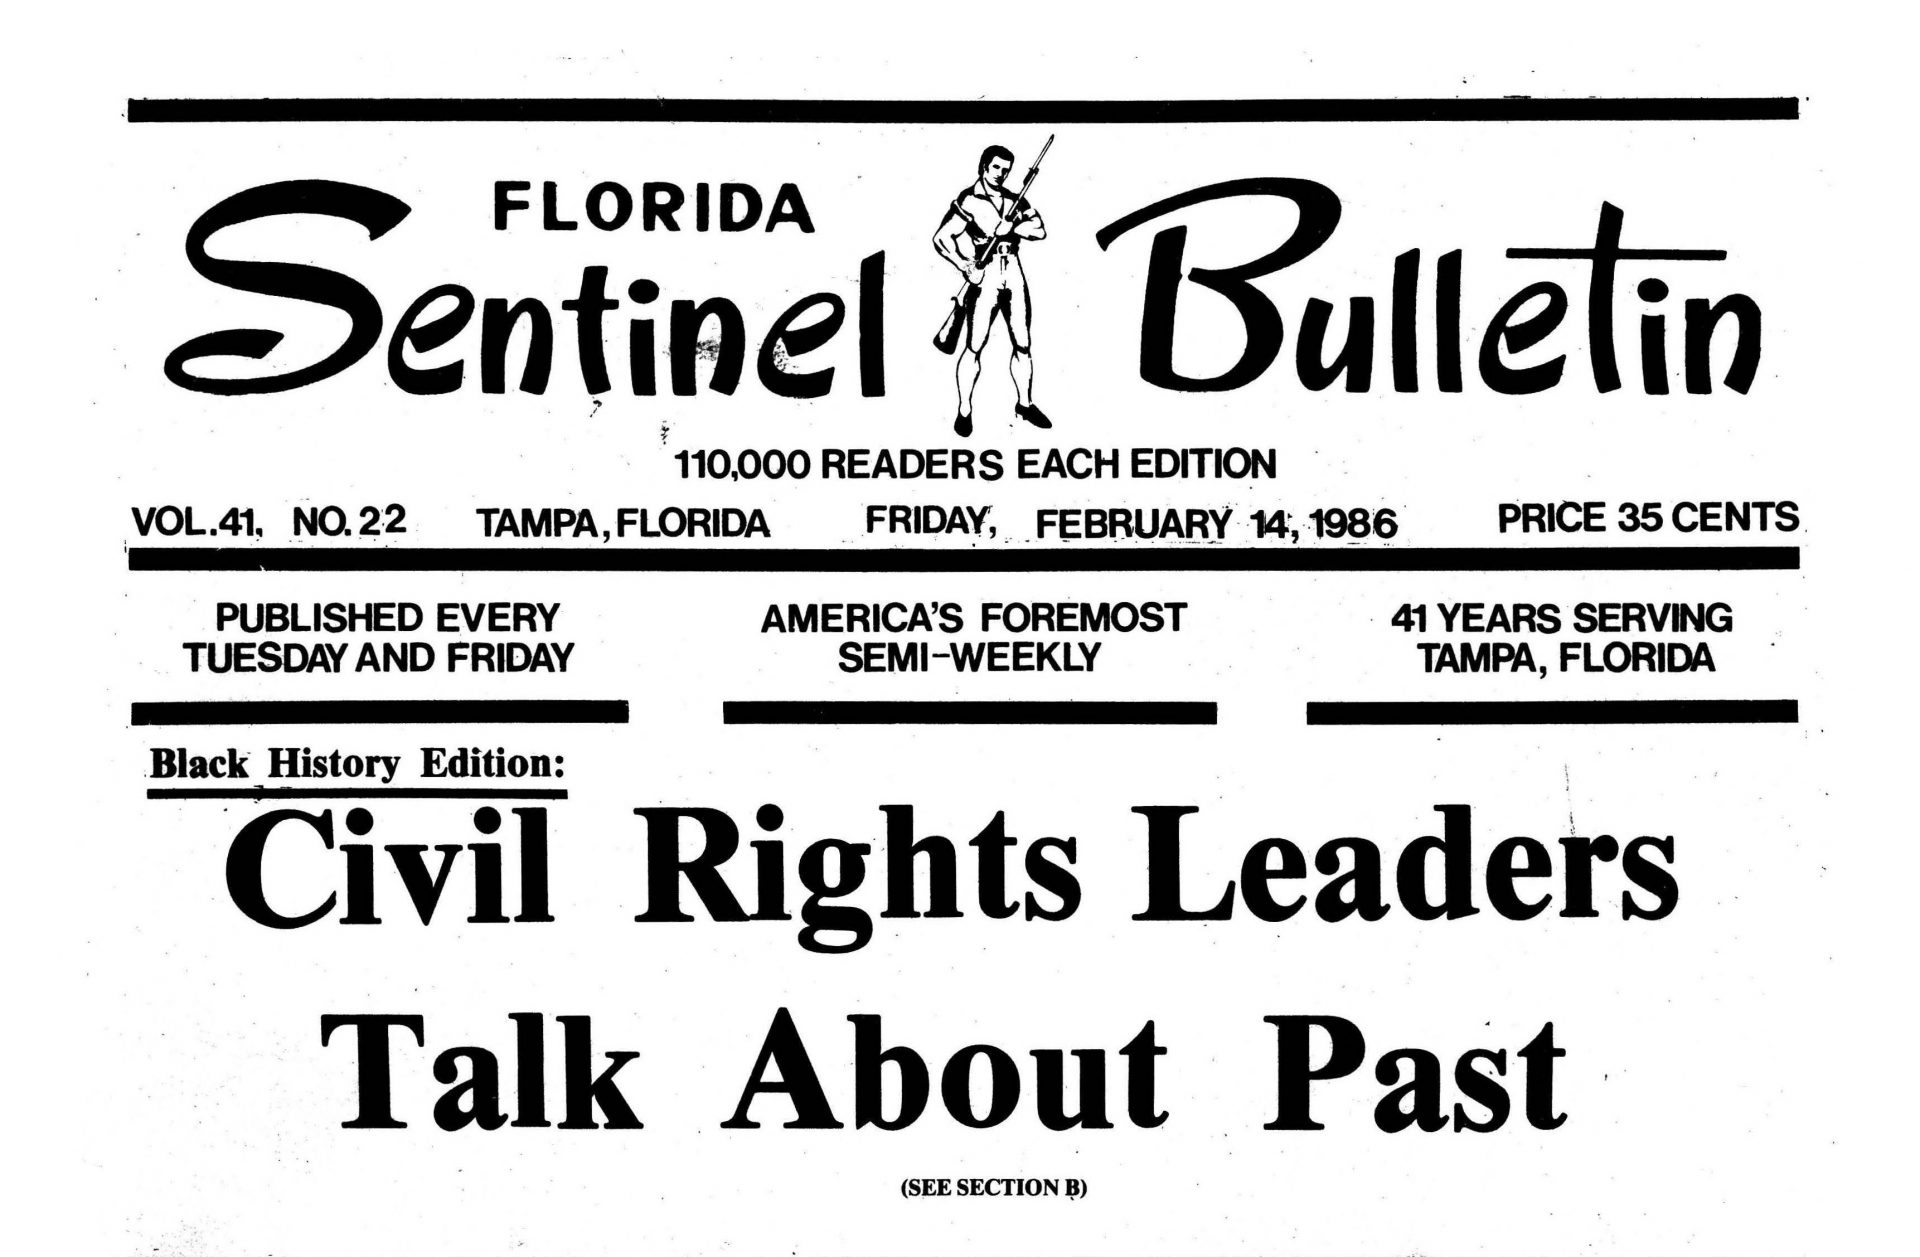 Cover of the Florida Sentinel Bulletin newspaper